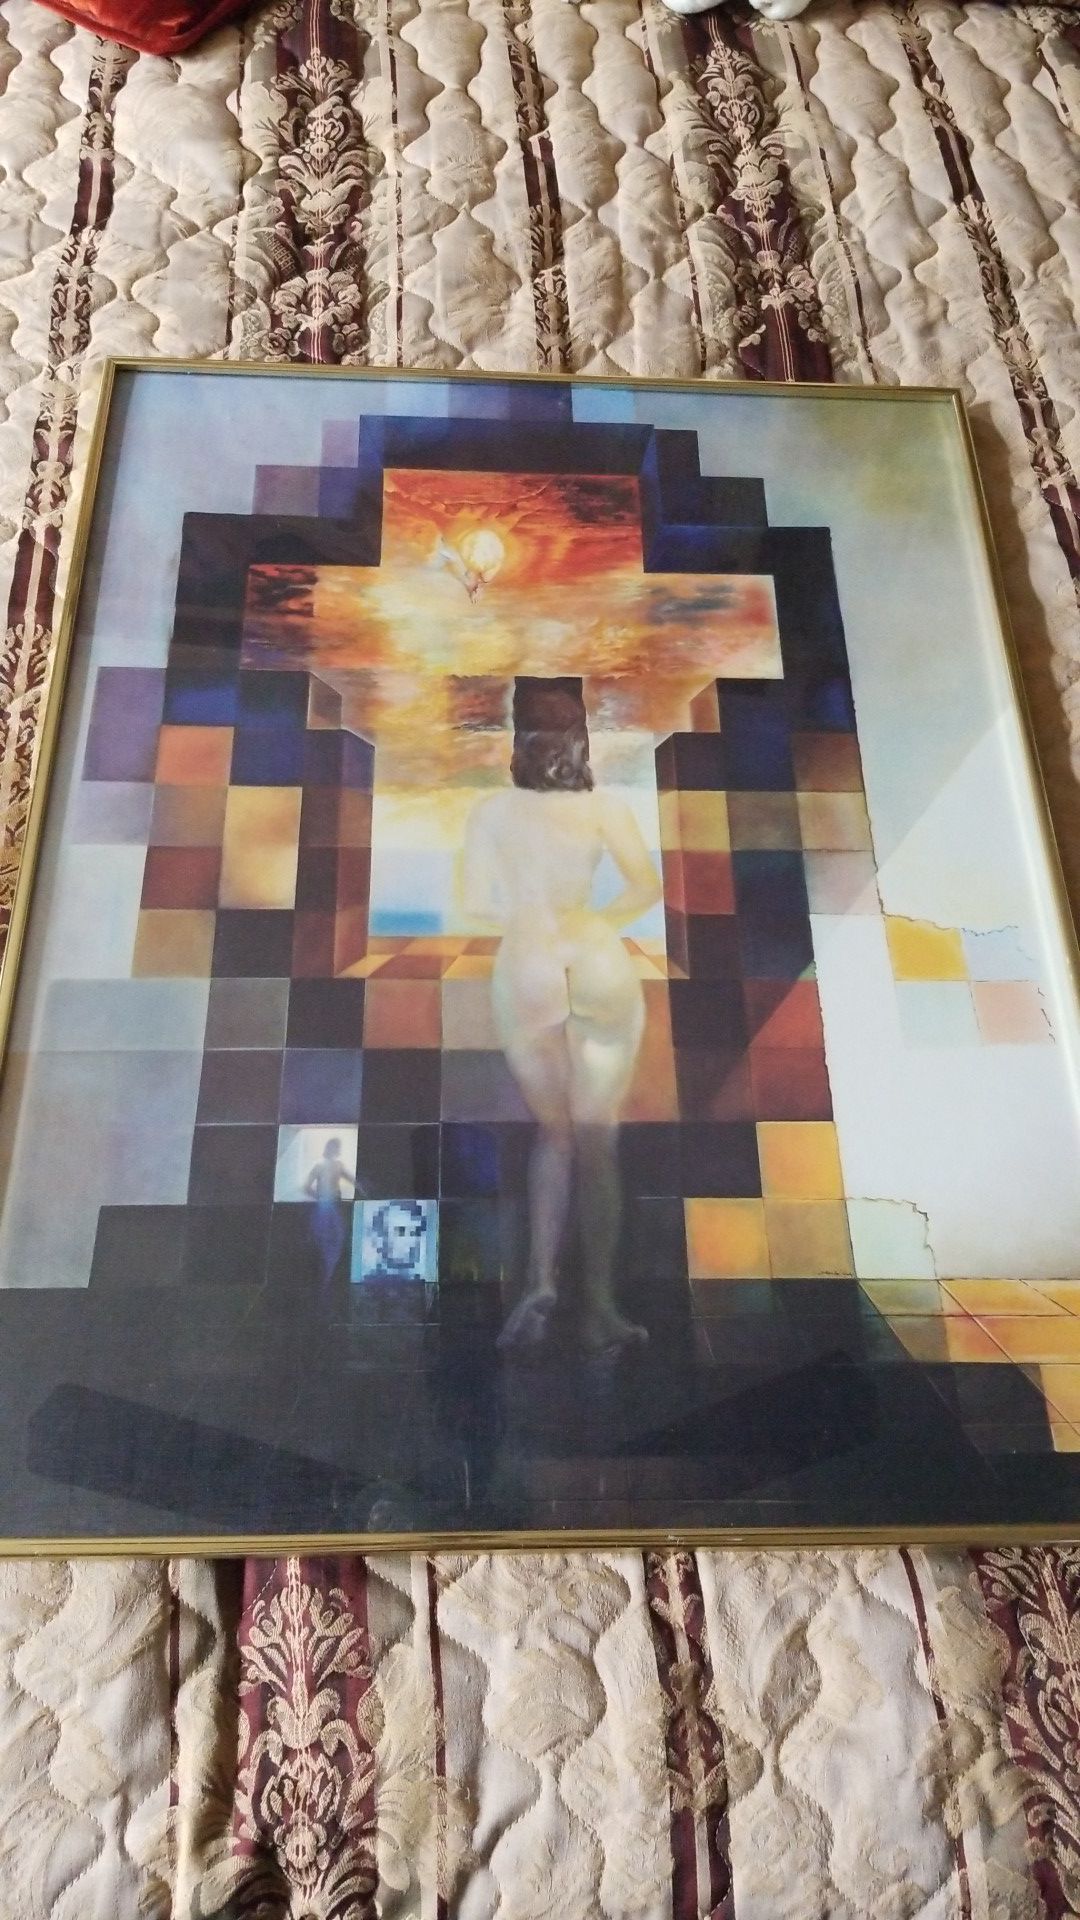 Painting. Print. Dali. Copy. In glass frame.